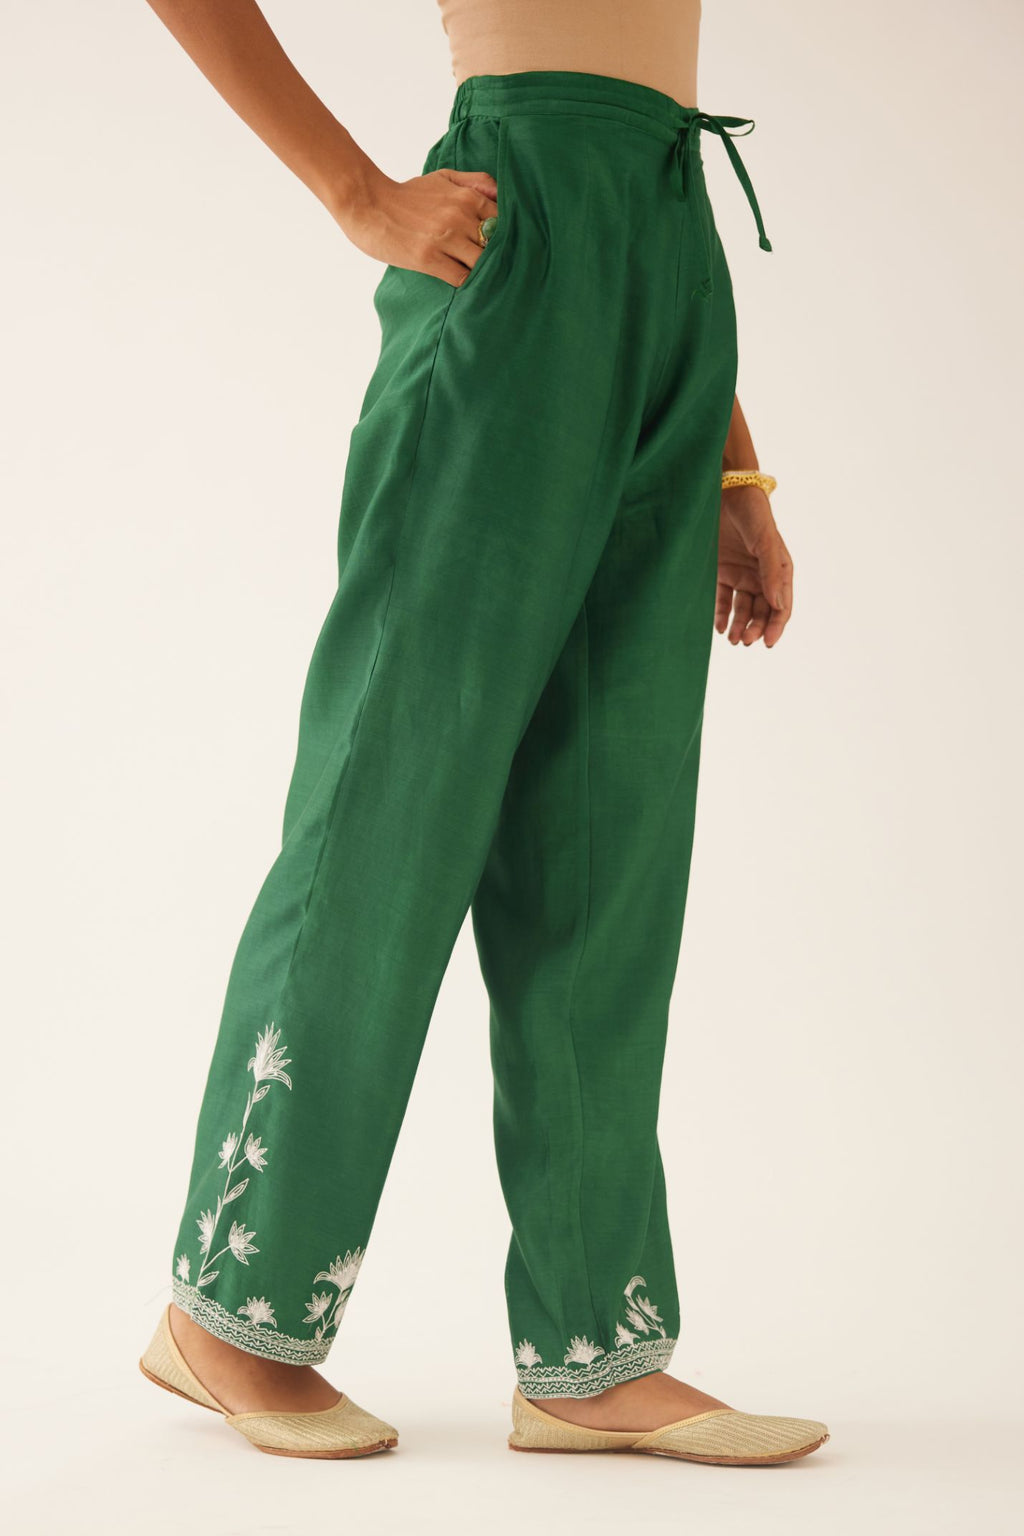 Green silk chanderi straight pants with off white silk thread embroidery at hem.